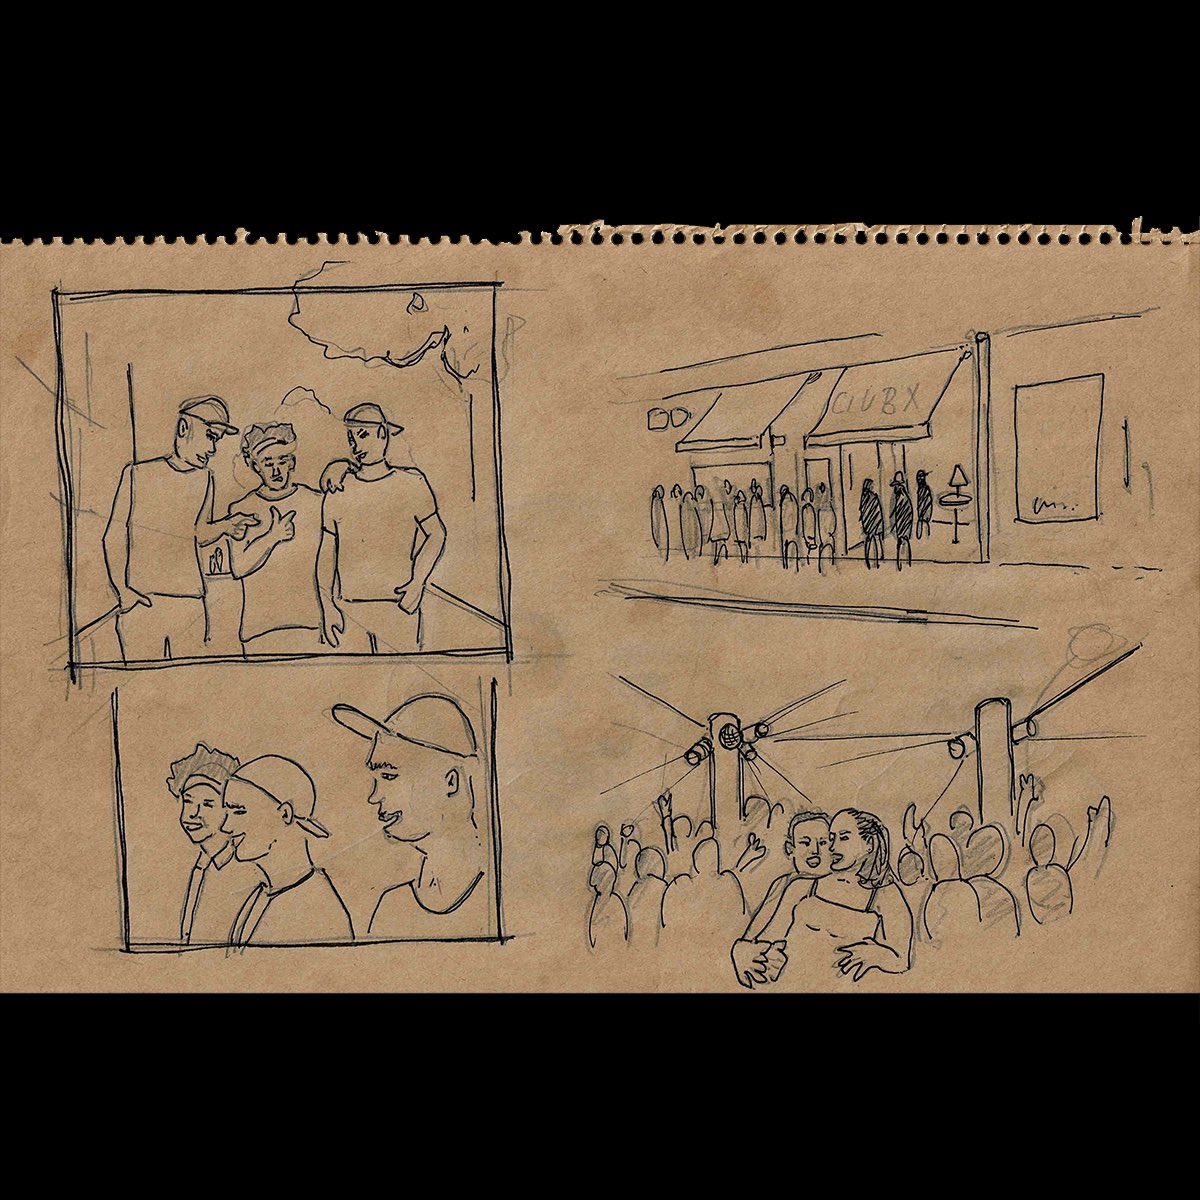 These are storyboard sketches by my brother @bzwax510 for our award winning short film ‘FEAR’ about a young boy growing up in Jamaica and a father who sees a shadow of himself in the past and the present. The journey from poetry to film took many turns #thejustandtheblind